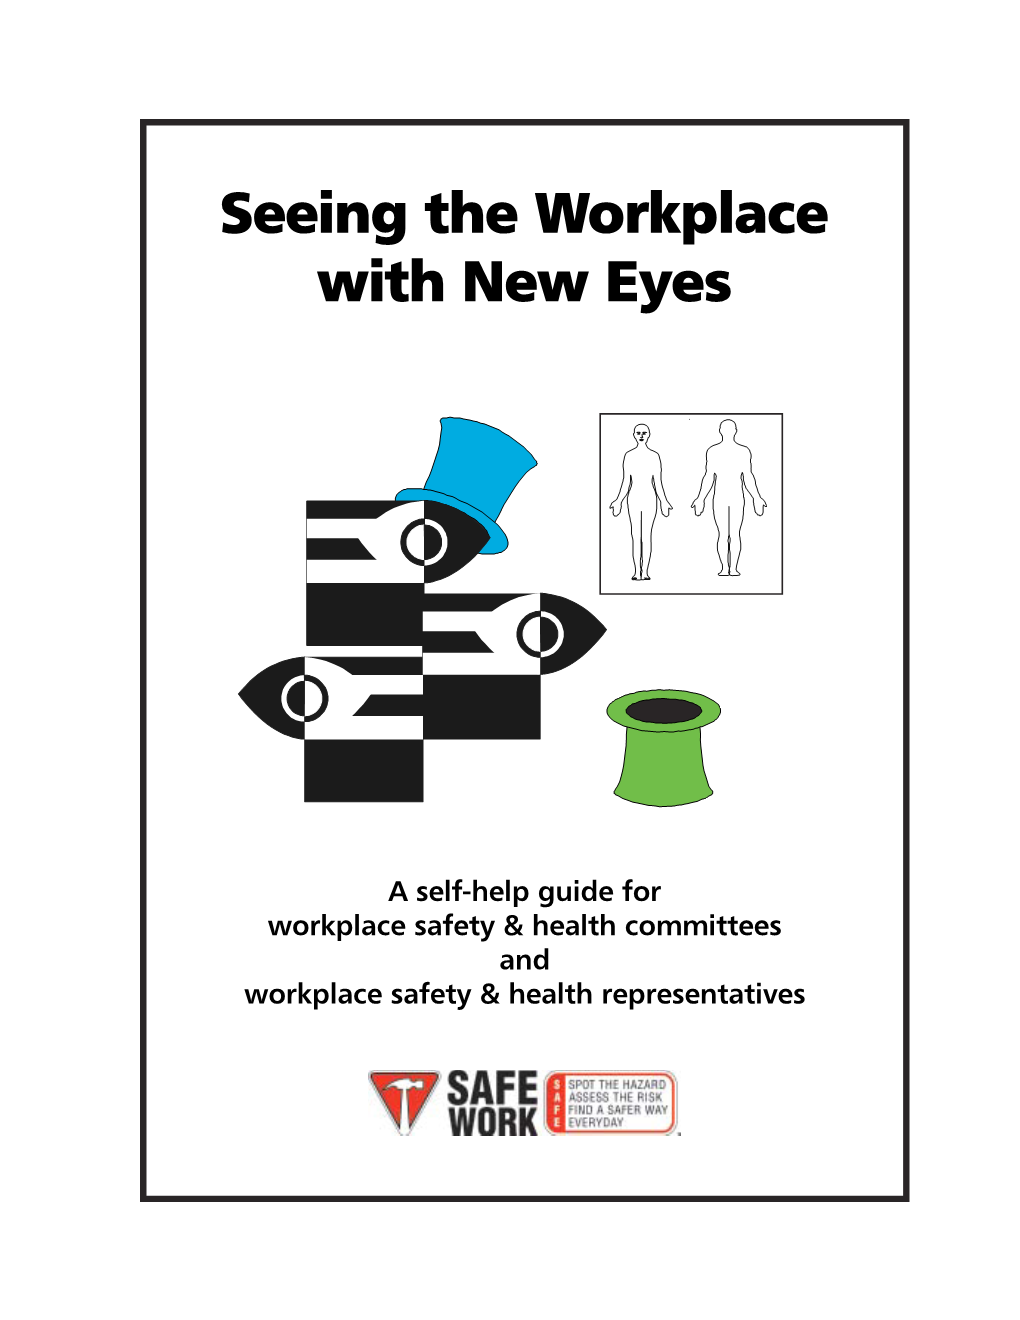 Seeing the Workplace with New Eyes Project Team